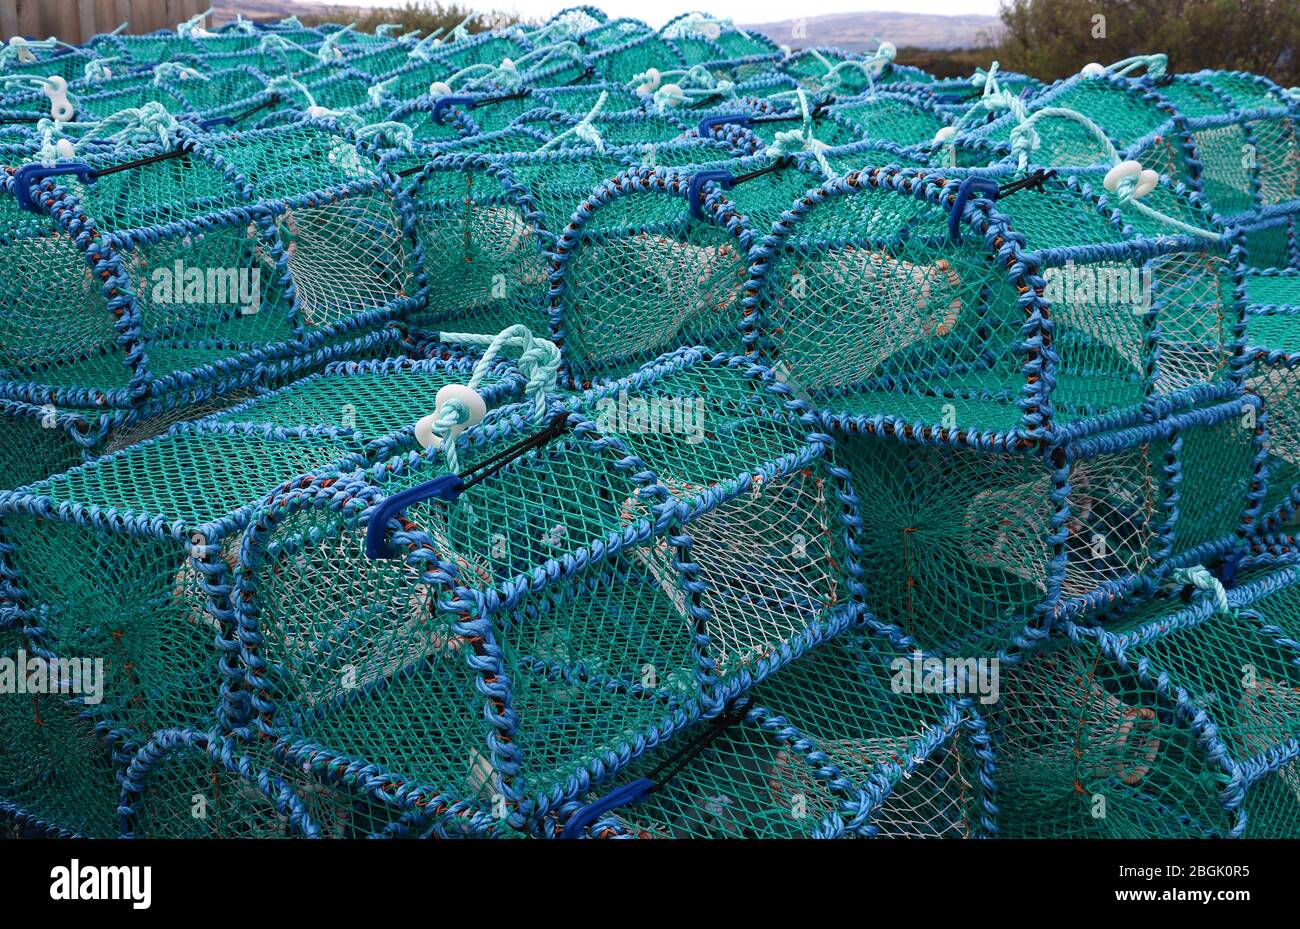 Stacks of blue Scottish crab pots or creels, used to trap crabs, on a dock on the Isle of Mull, Scotland. Old creel fishing tradition.Marine industry. Stock Photo